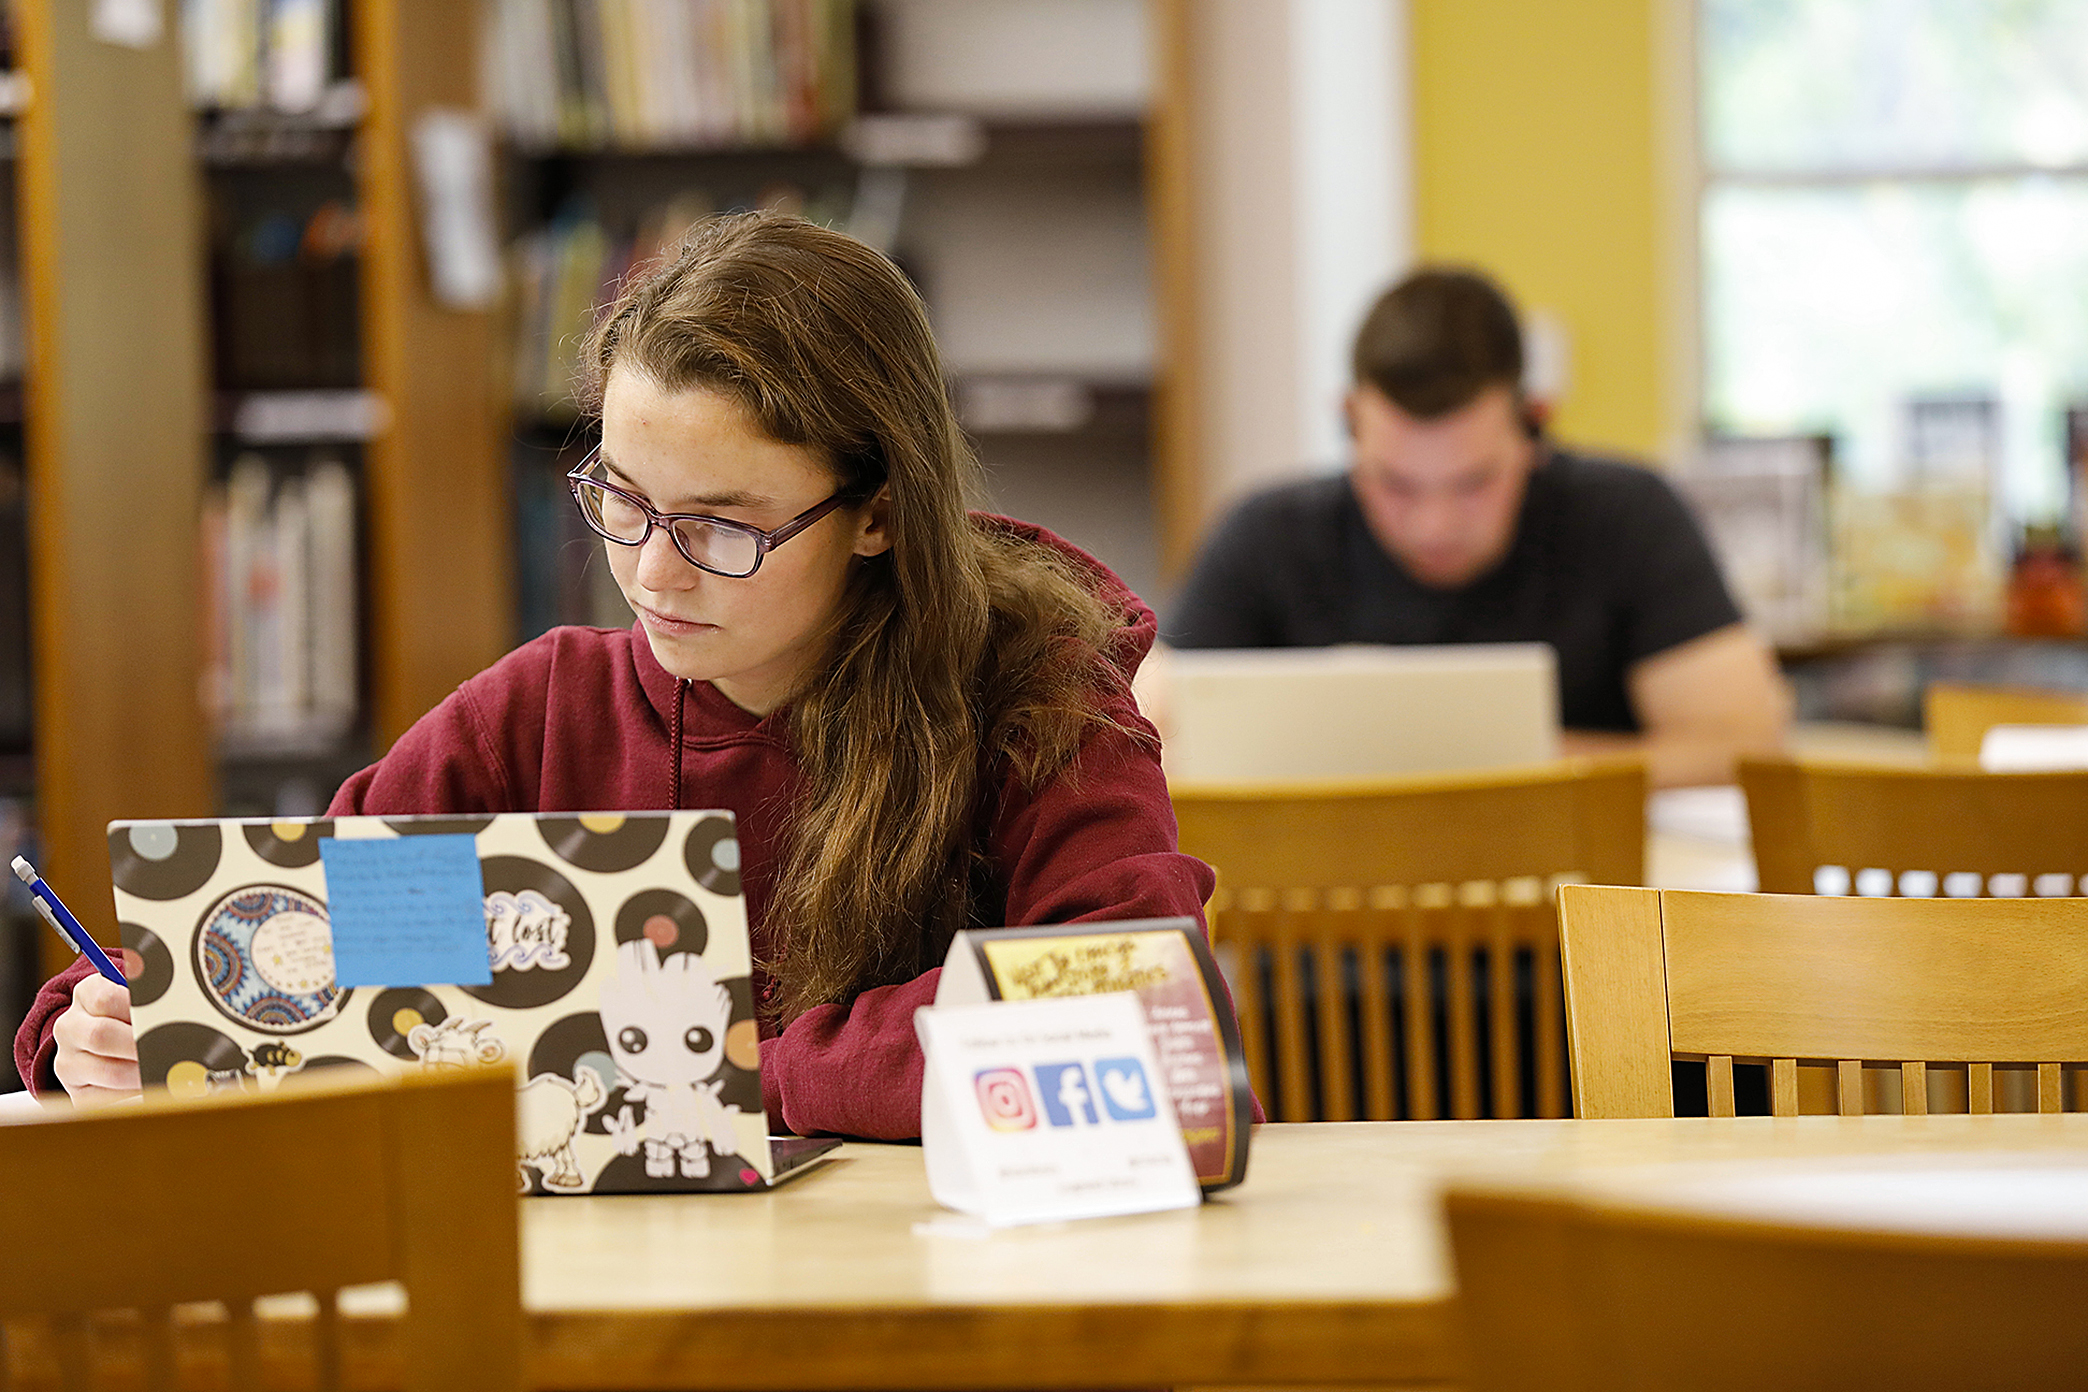 Students sitting at desks and studying in the library